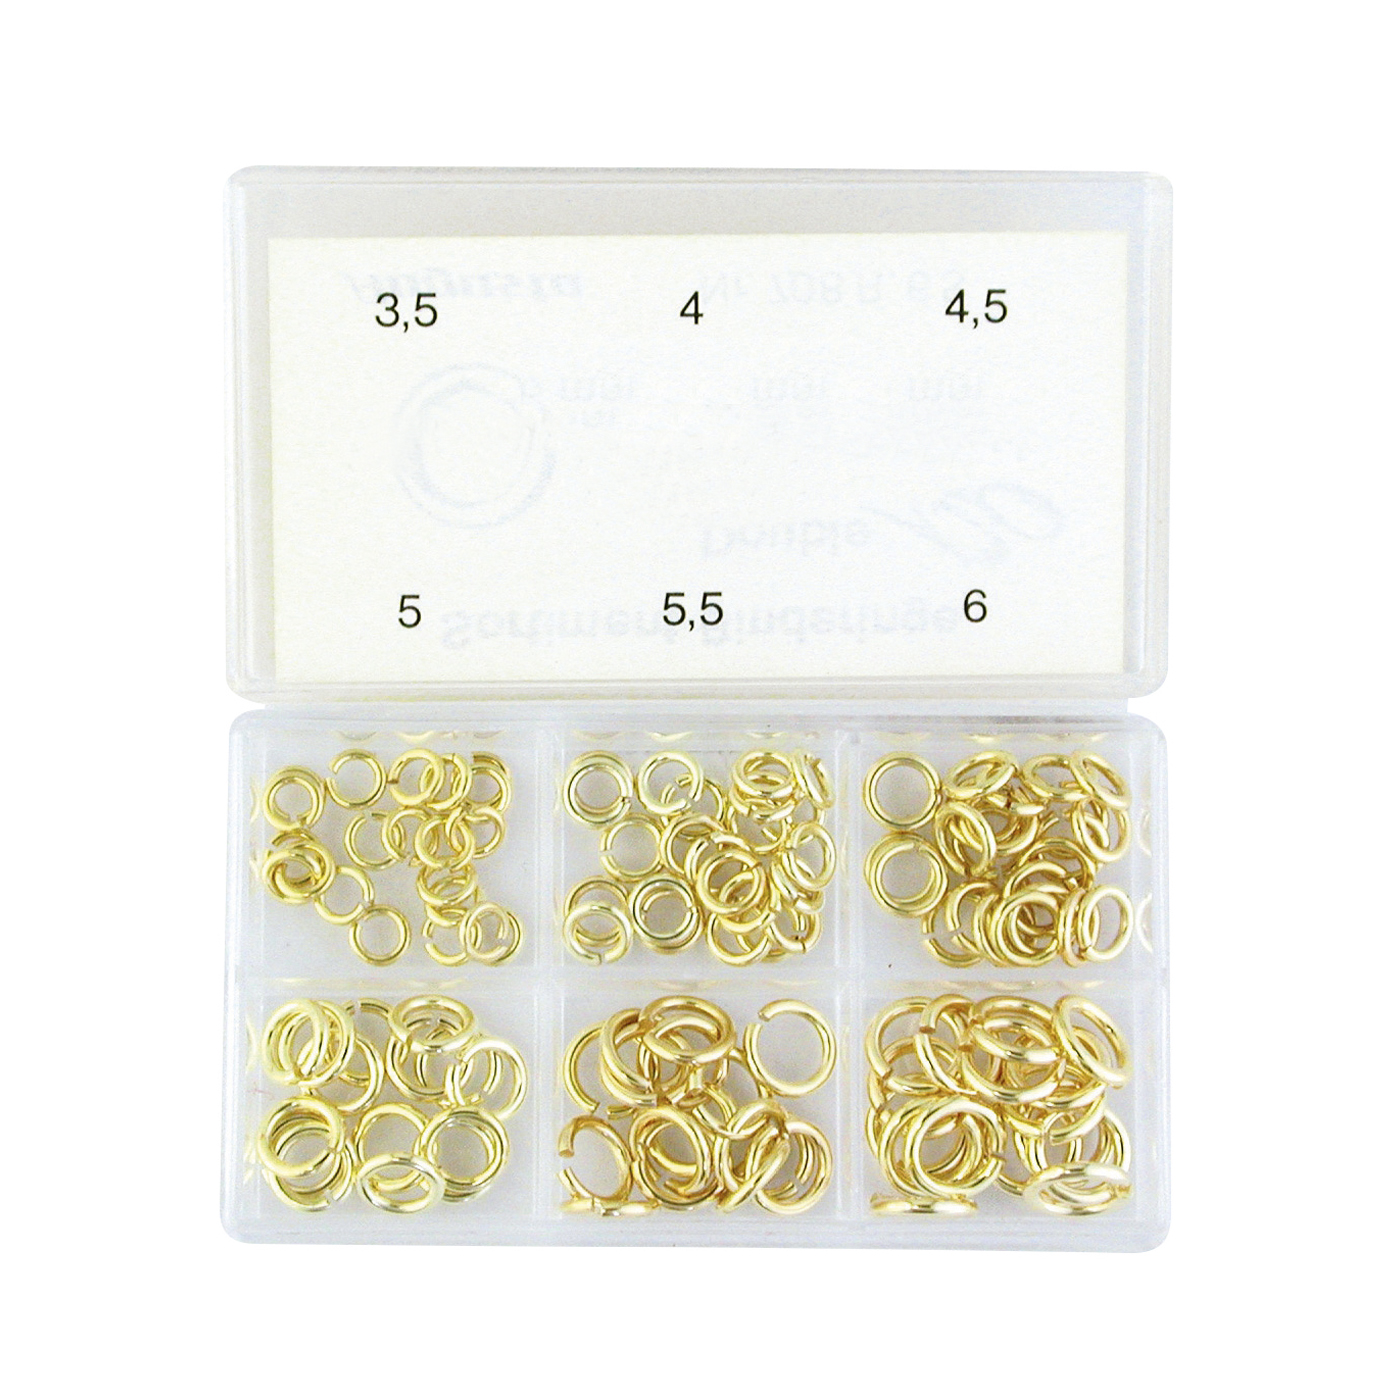 Binding Rings, Round, Rolled Gold - 1 assortment